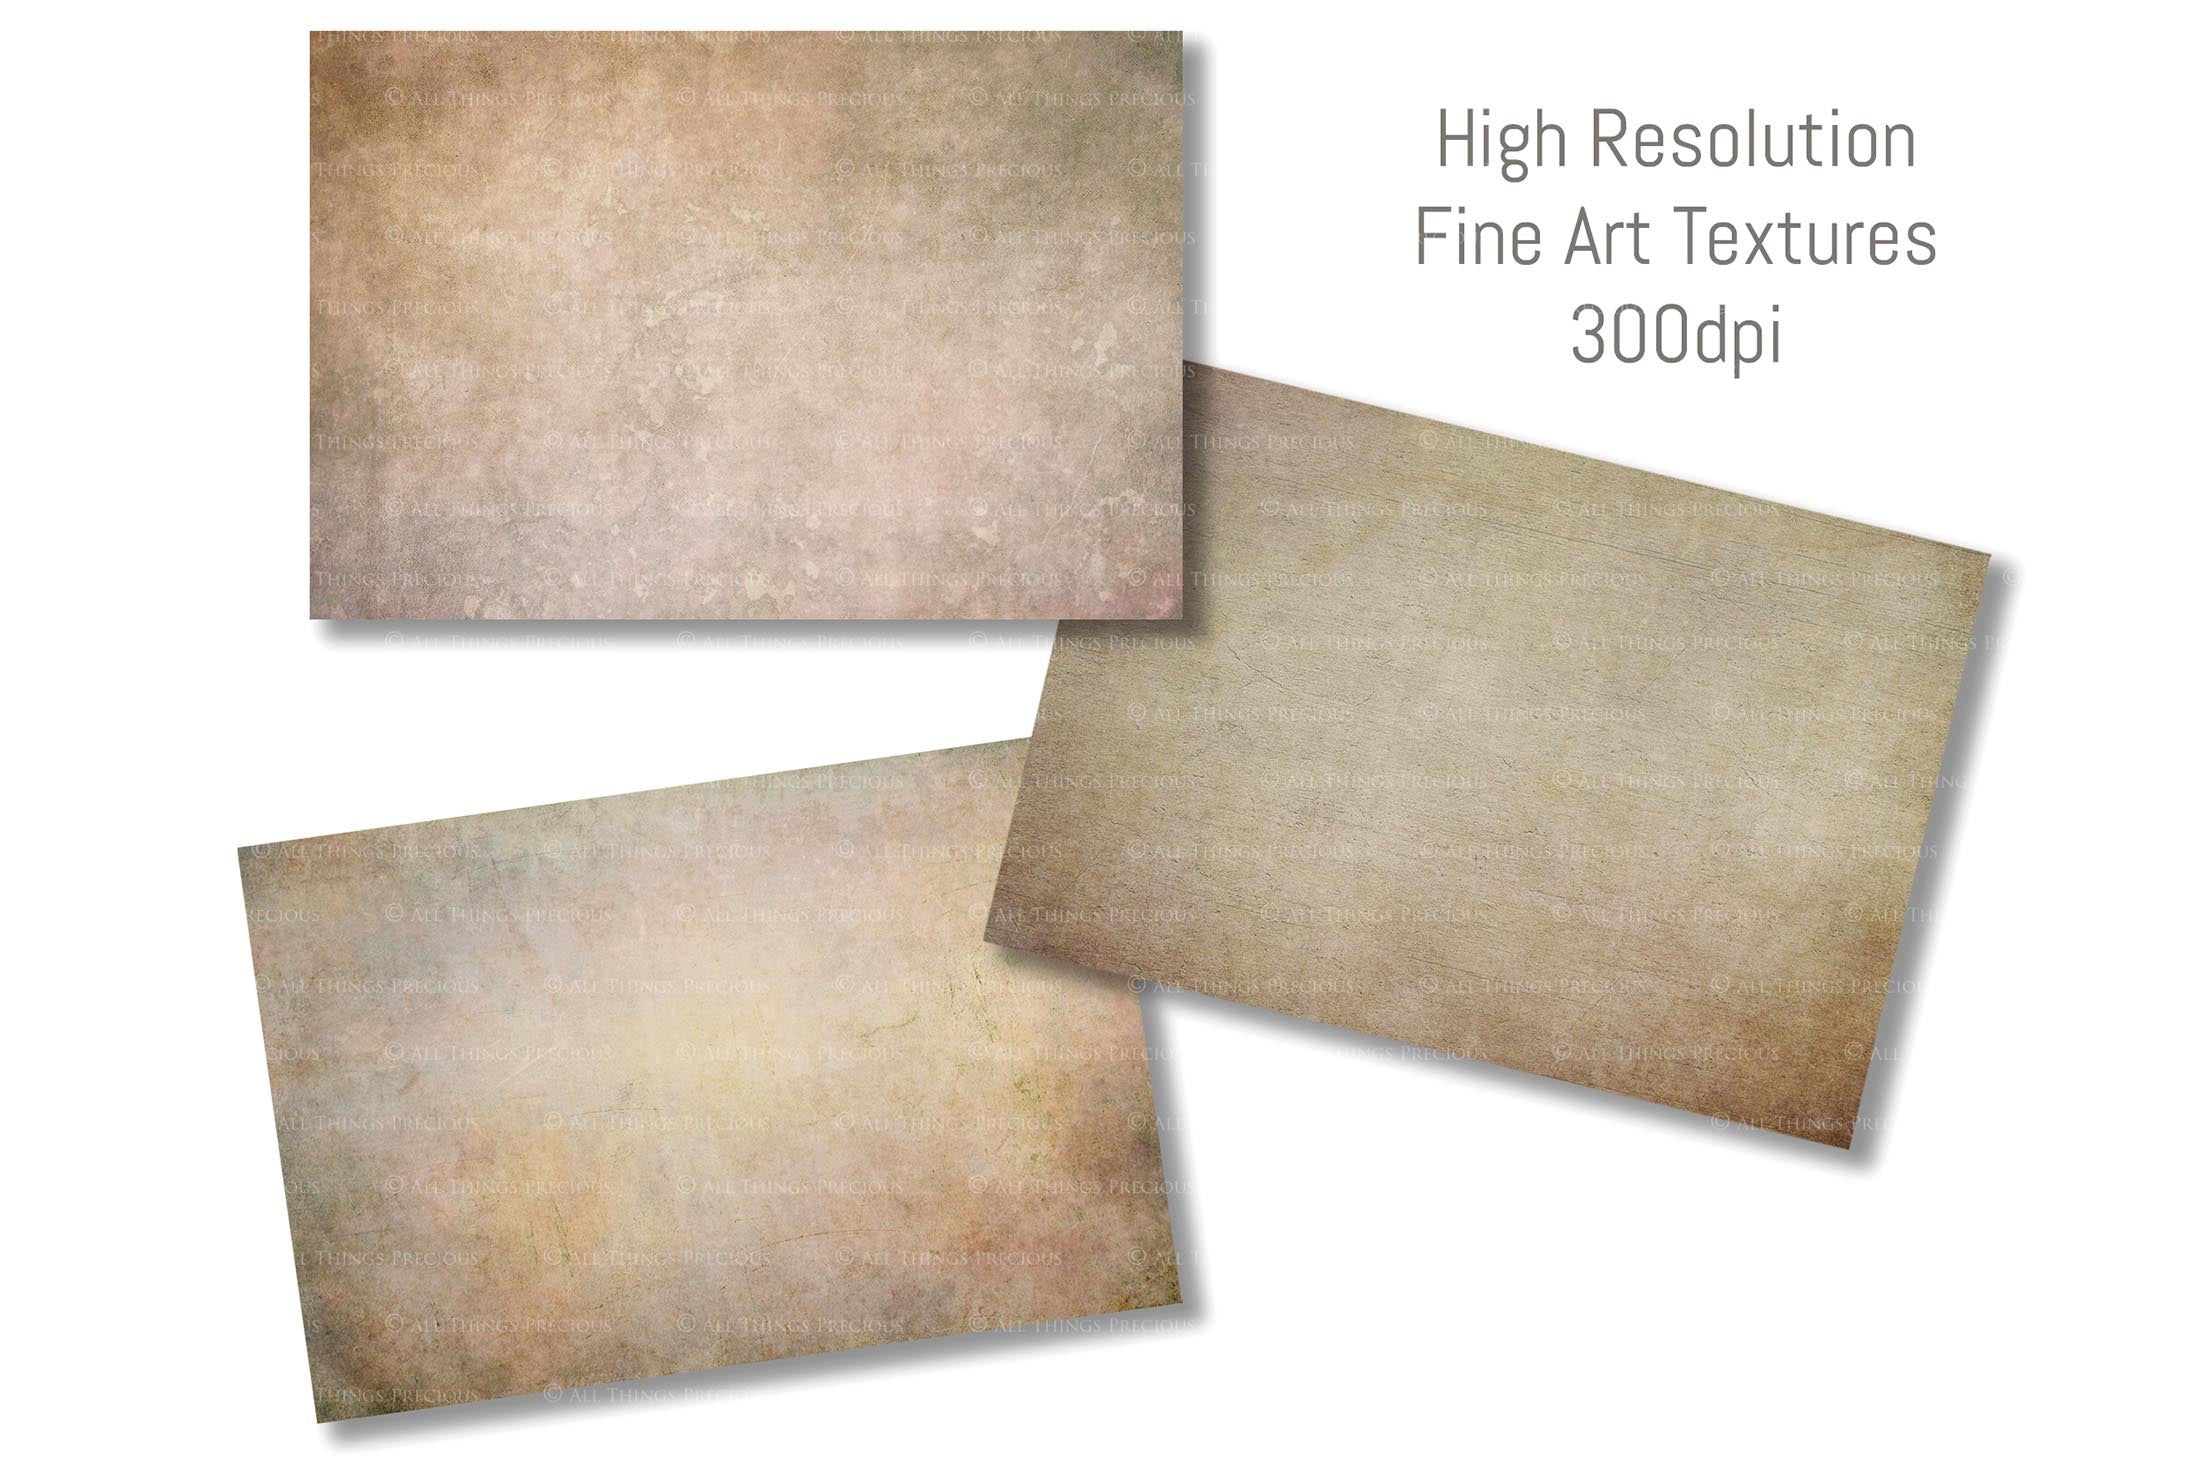 Fine art textures. Texture for photographers and digital editing. Photo Overlays. Antique, Vintage, Grunge, Light, Dark Bundle. Textured printable Canvas, Colour, Monochrome, Bundle. High resolution, 300dpi Graphic Assets for photography, digital scrapbooking and design. By ATP Textures